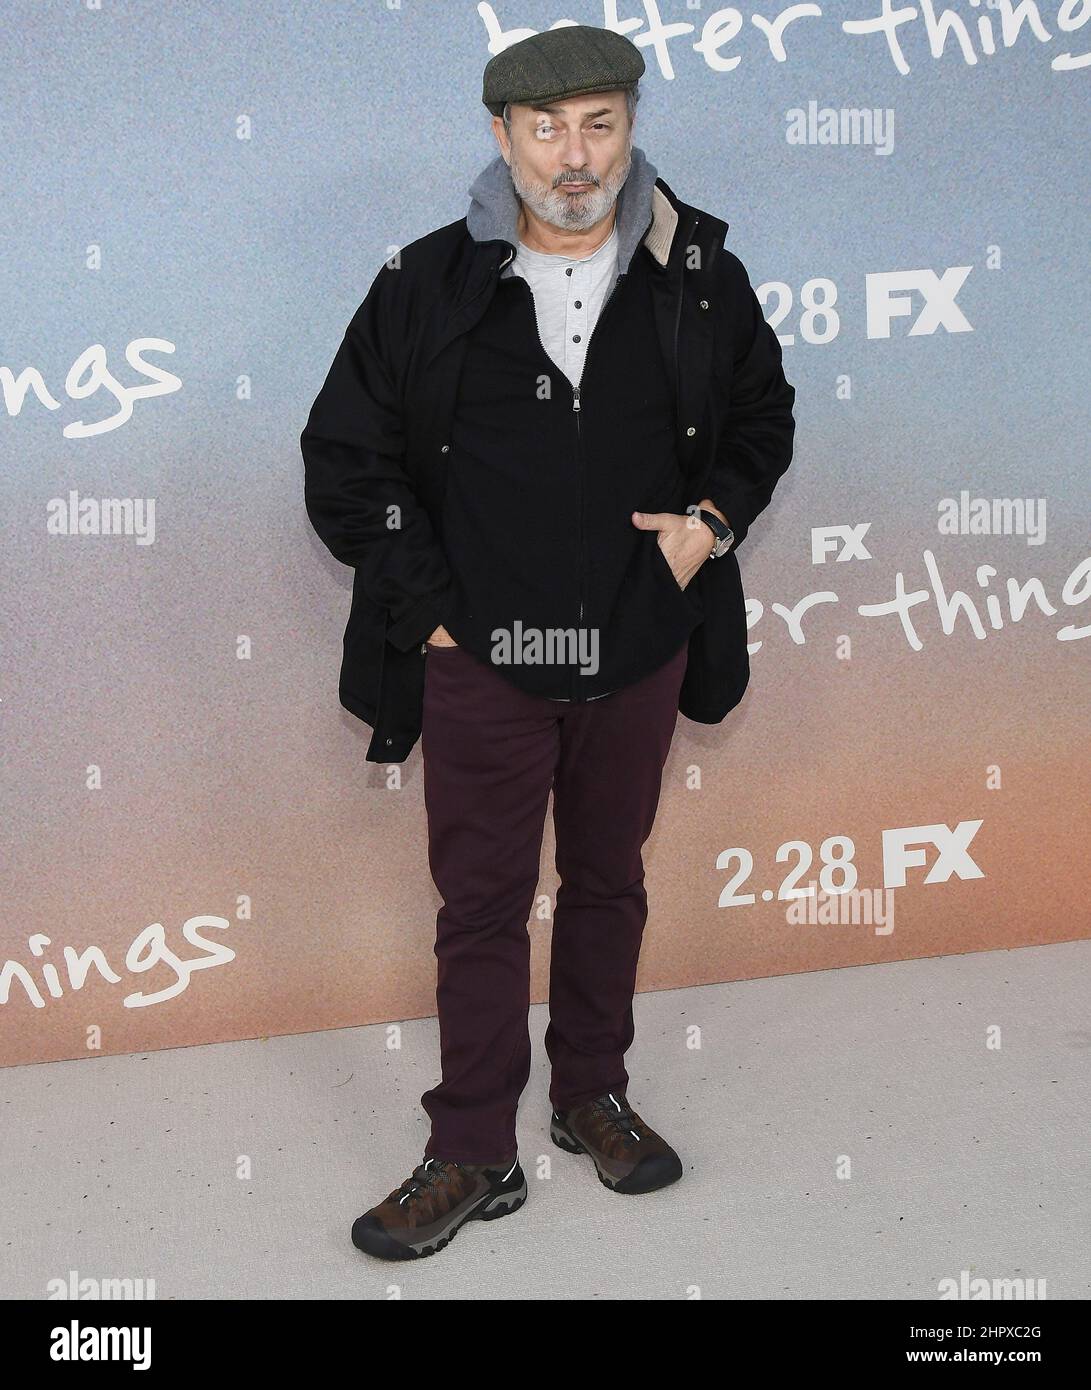 Los Angeles, USA. 23rd Feb, 2022. Kevin Pollak arrives at the Premiere of FX's BETTER THINGS Season 5 held at the Hollywood Forever Cemetary in Los Angeles, CA on Wednesday, ?February 23, 2022. (Photo By Sthanlee B. Mirador/Sipa USA) Credit: Sipa USA/Alamy Live News Stock Photo